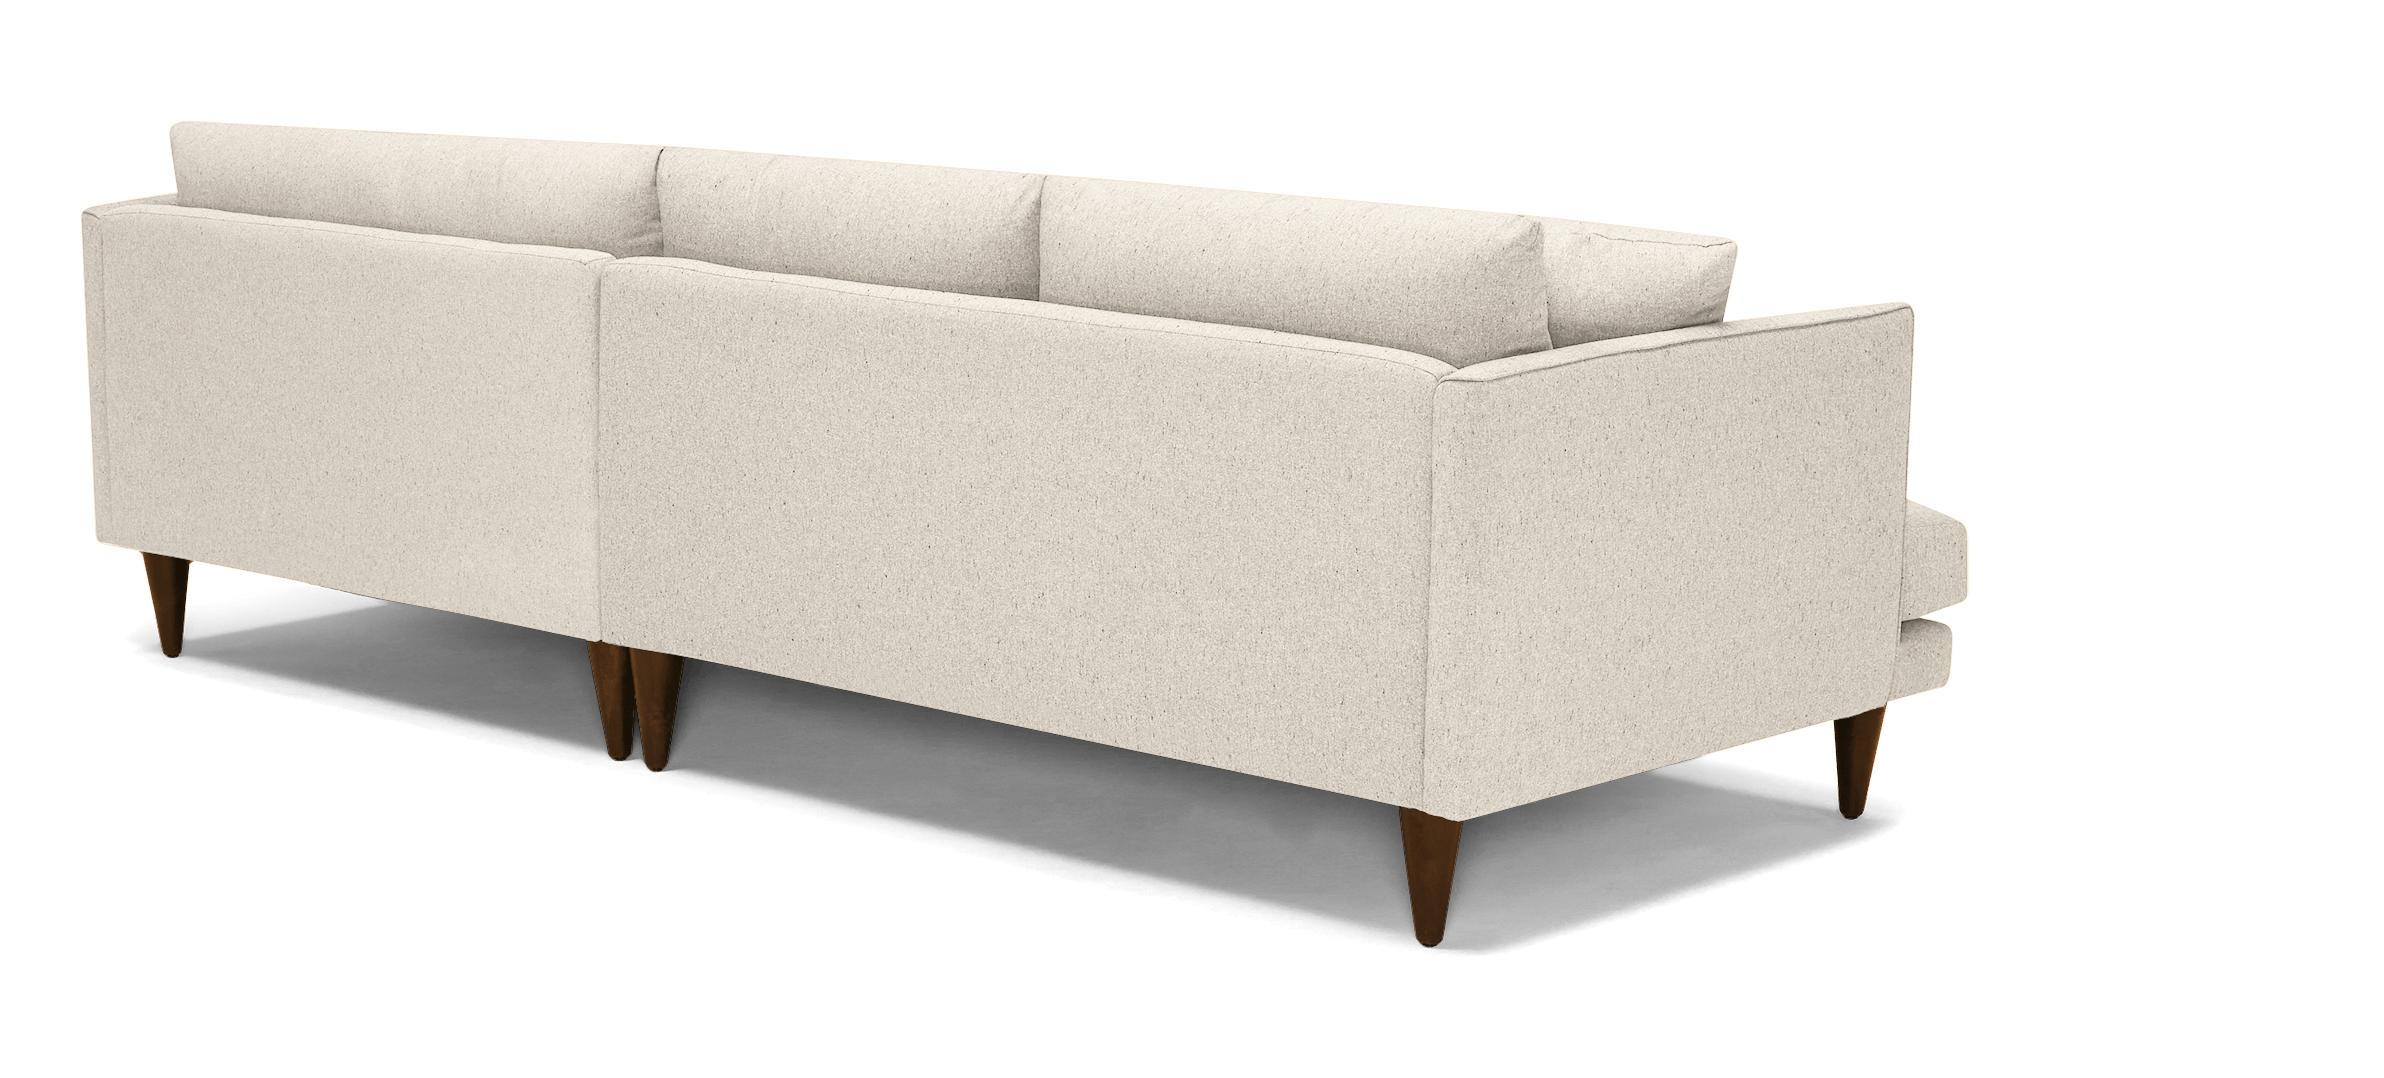 Lewis Mid Century Modern Sectional - Pet and Kid Friendly- left facing chaise - Image 3